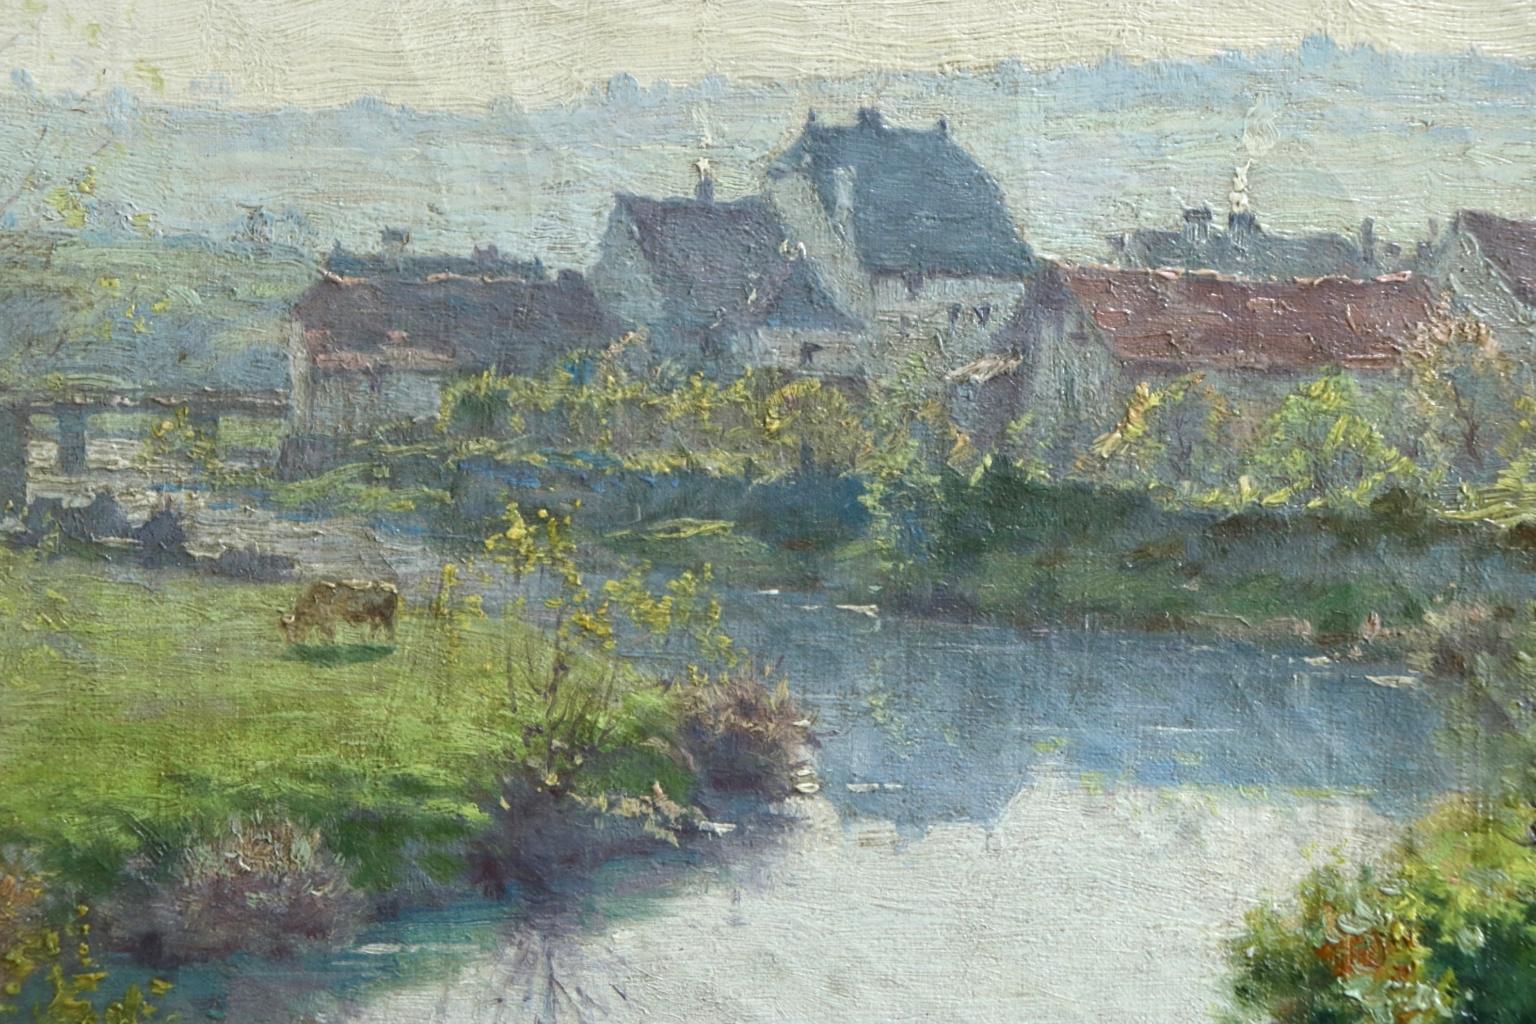 A Summer's Day - Impressionist Oil, Cattle by River in Landscape by J Monchablon 2